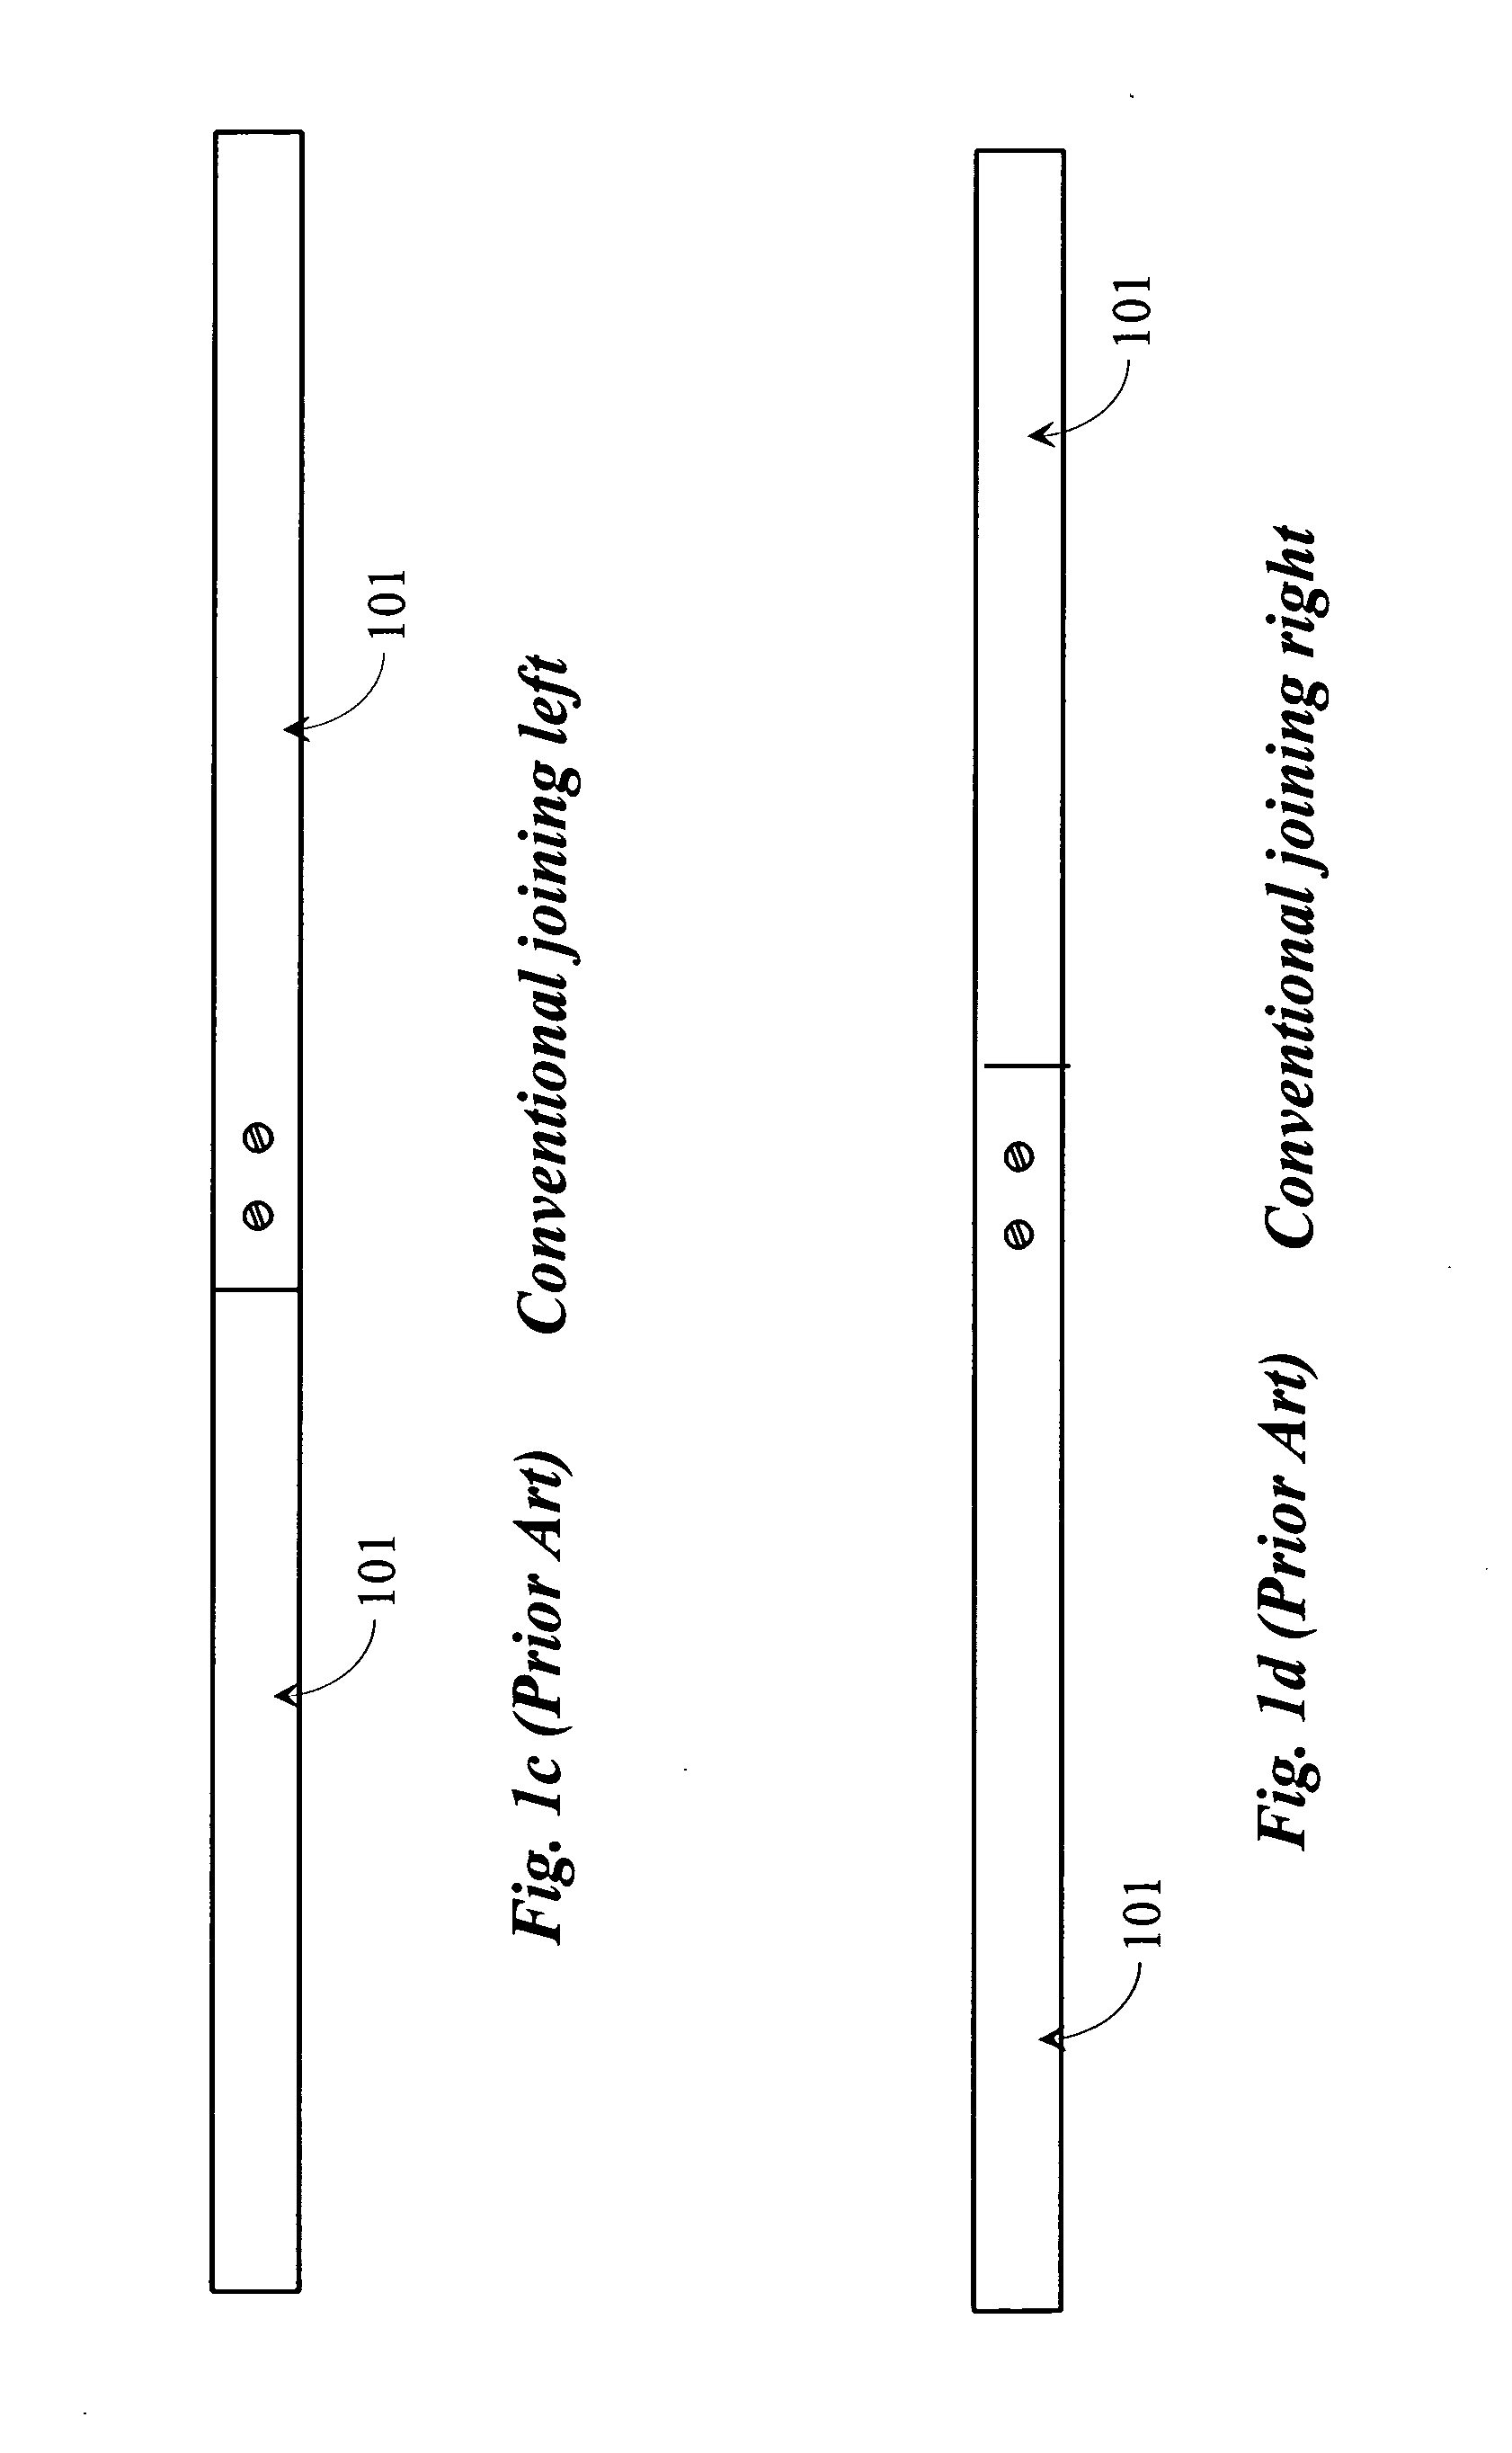 Landscape border apparatus and method for installation